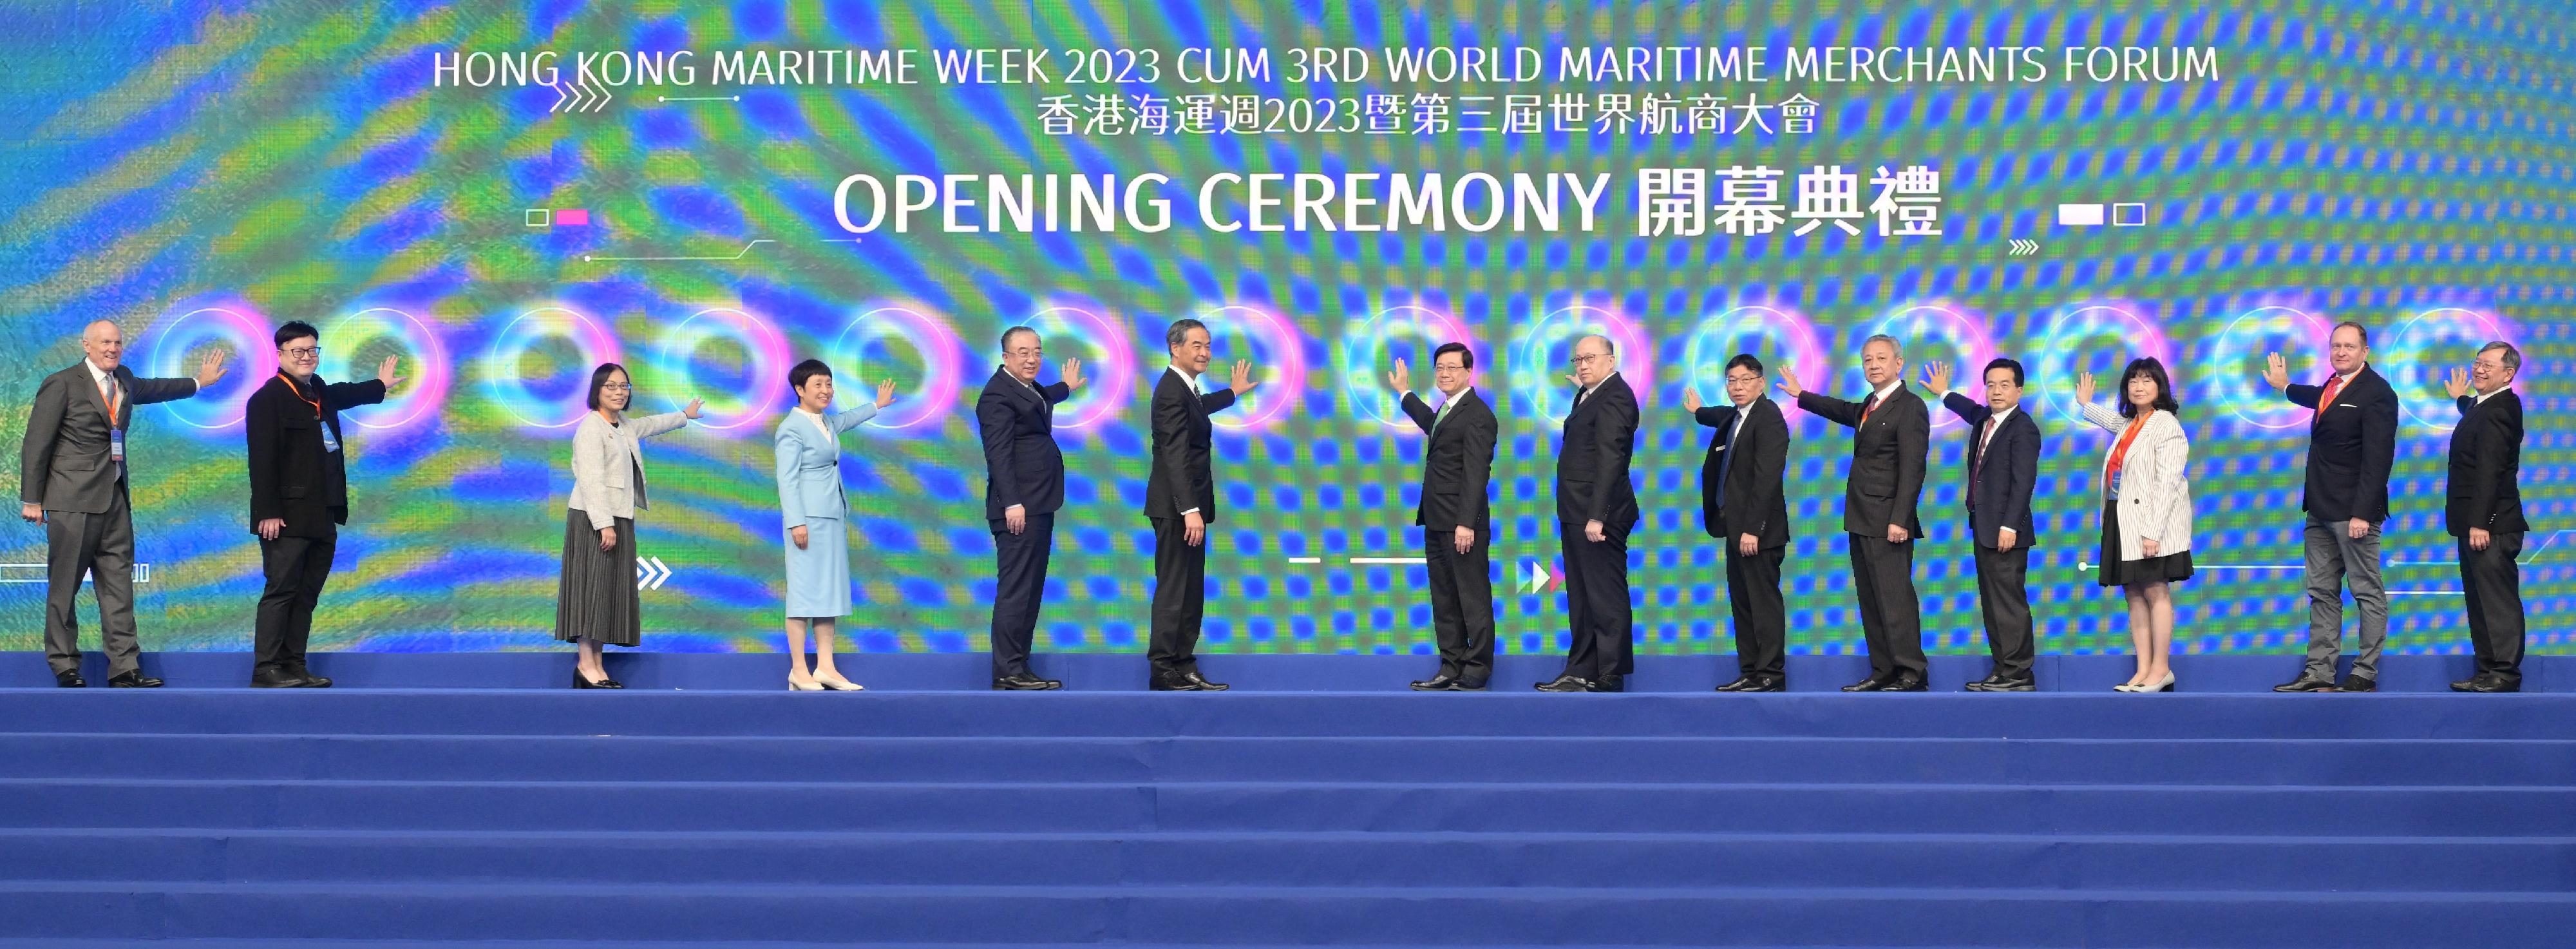 The opening ceremony of Hong Kong Maritime Week 2023, a major annual event of the maritime and port industries in Hong Kong, was held today (November 20). Photo shows the Chief Executive, Mr John Lee (seventh left); Vice-Chairman of the National Committee of the Chinese People's Political Consultative Conference Mr C Y Leung (sixth left); the Director of the Liaison Office of the Central People's Government in the Hong Kong Special Administrative Region, Mr Zheng Yanxiong (seventh right); Vice Minister of Transport Mr Fu Xuyin (fifth left); the Chairman of the Hong Kong Maritime and Port Board and Secretary for Transport and Logistics, Mr Lam Sai-hung (sixth right); the Chairman of the China Merchants Group, Mr Miao Jianmin (fourth right), and other guests officiating at the ceremony.